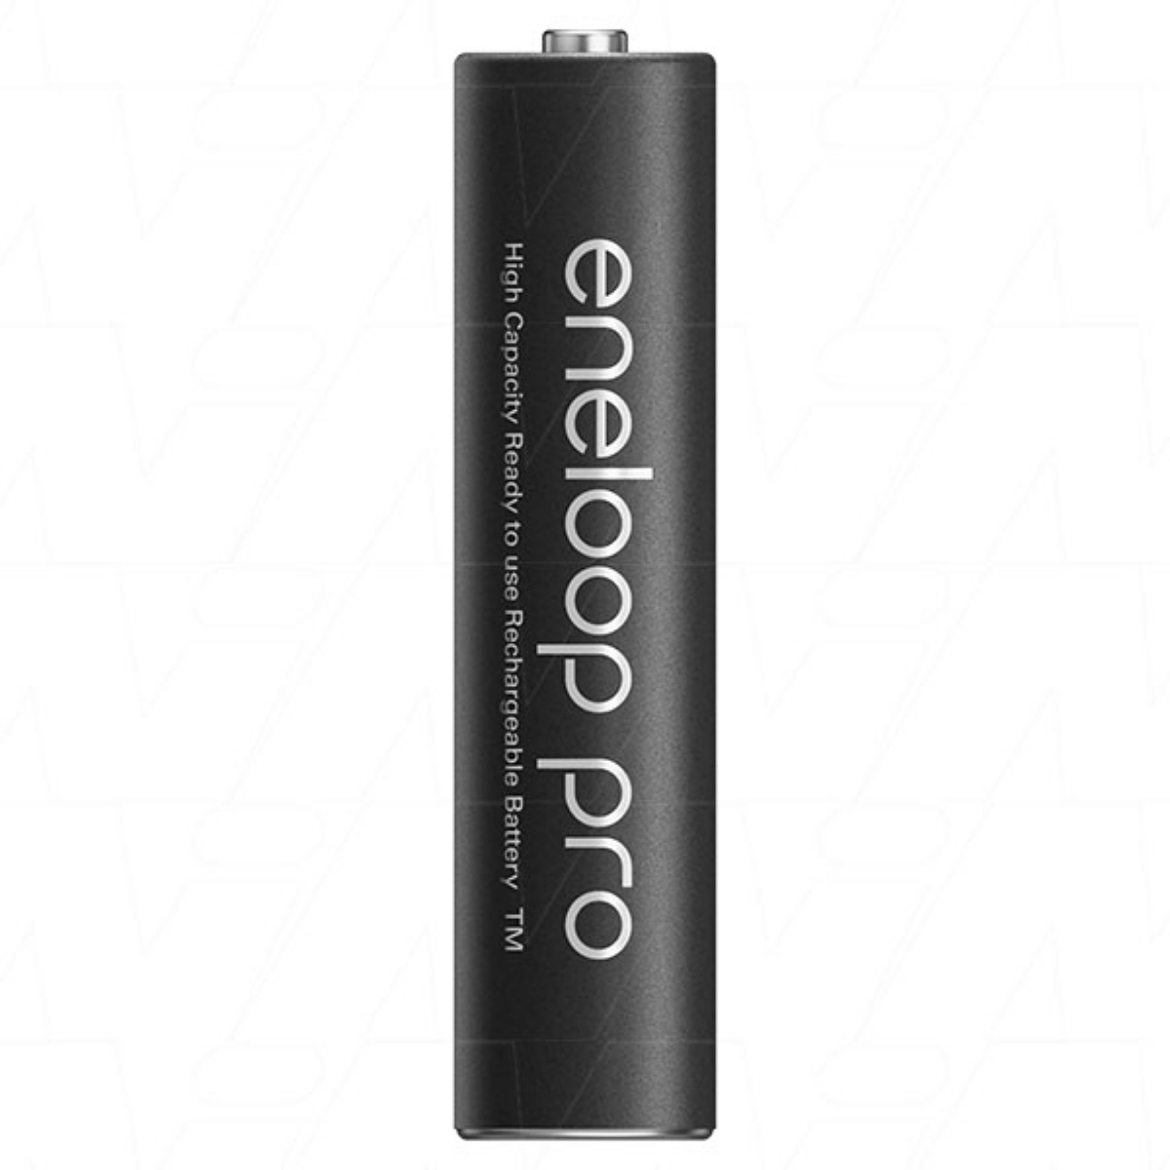 Picture of BK-4HCCE PANASONIC ENELOOP PRO NiMh AAA 1.2V 950mAh BATTERY **BULK PACKED** -- ( READY TO USE)